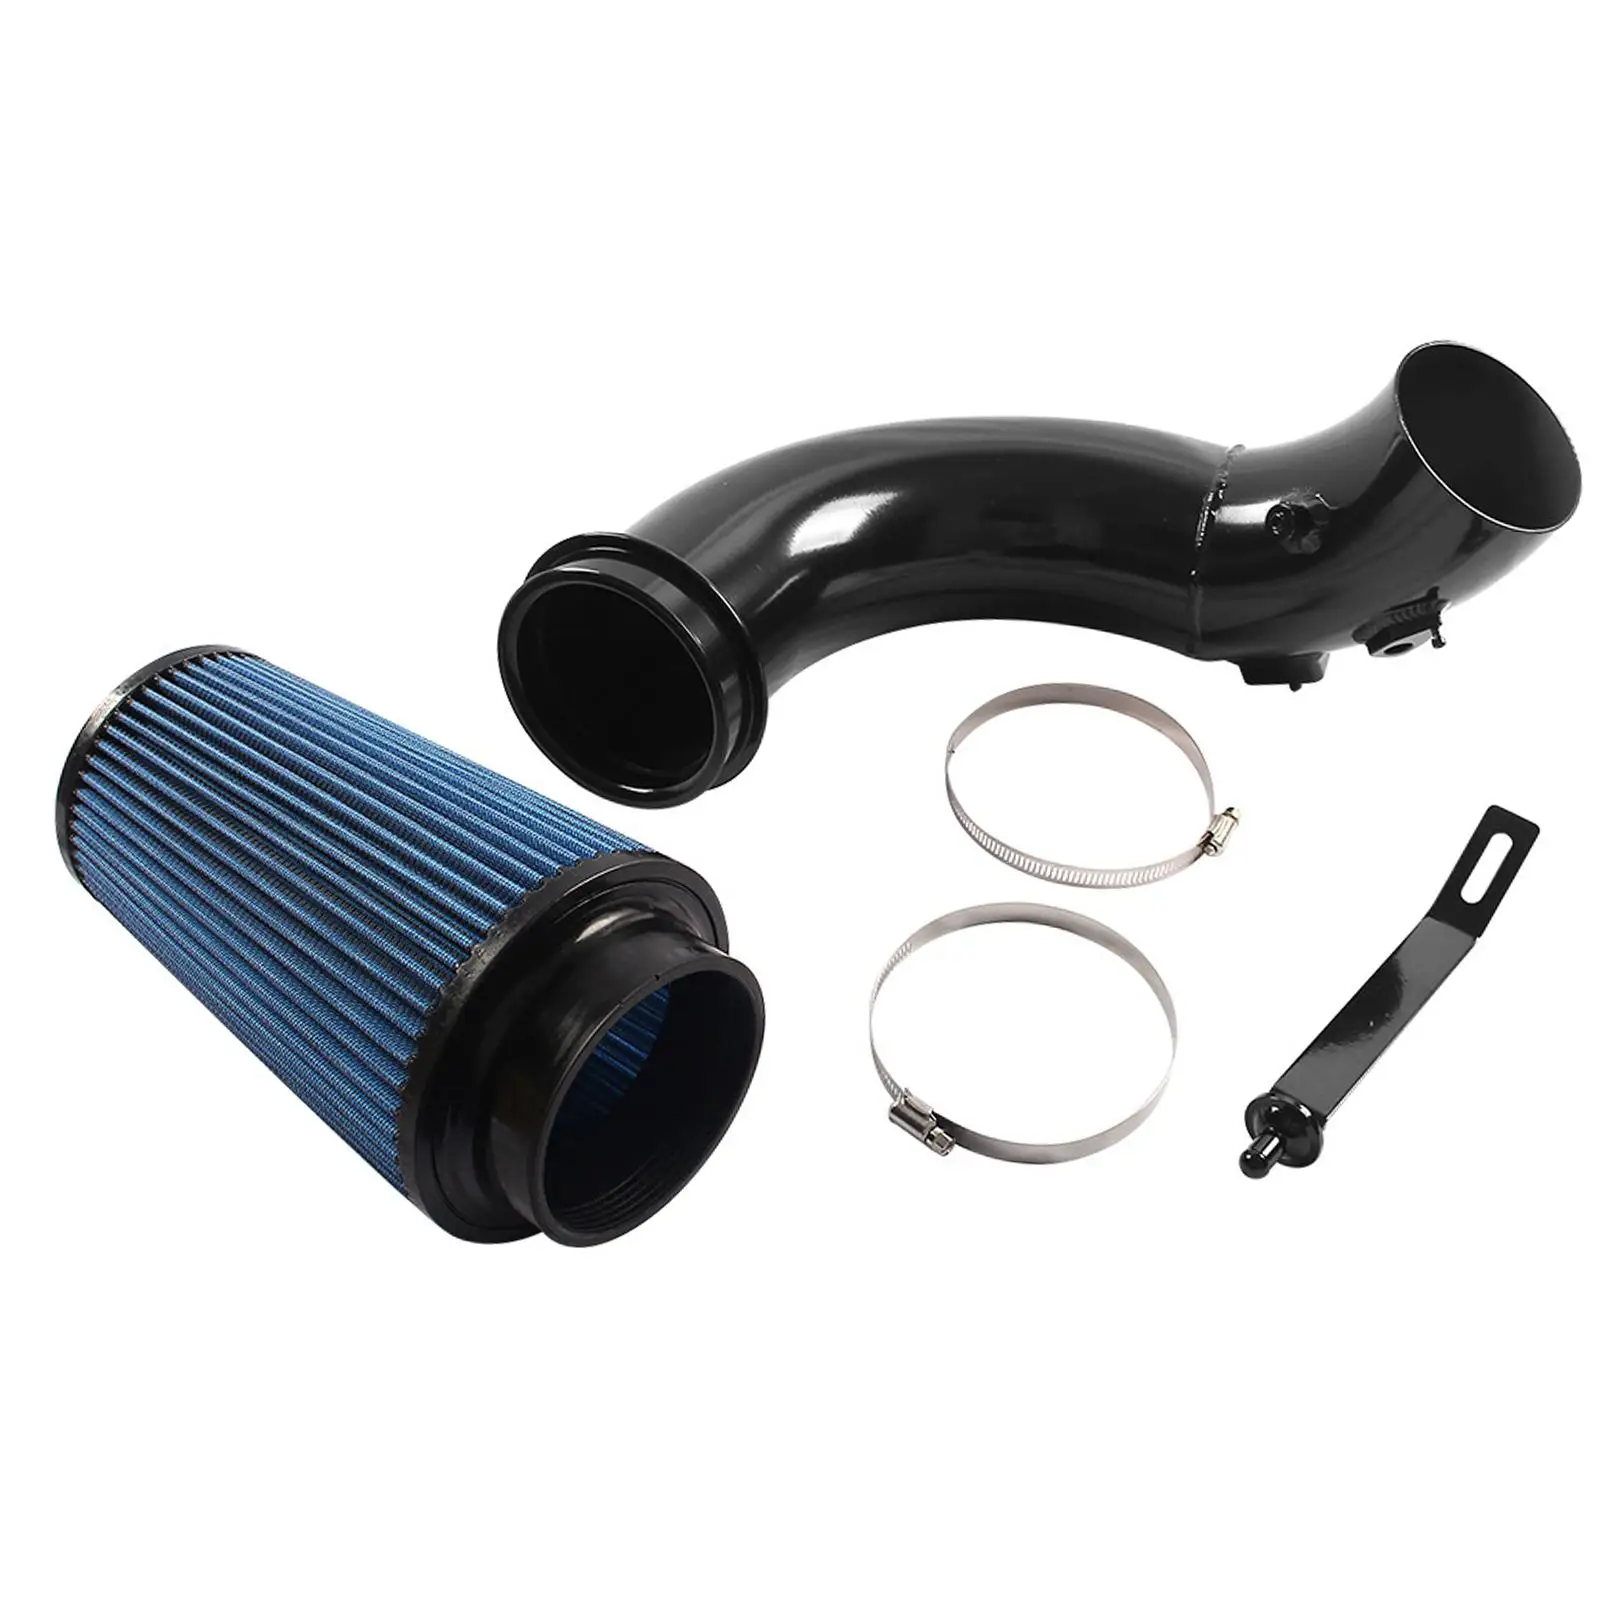 Cold Air Intake Filter/ with Filter/ Aluminum Alloy Iron Stainless Steel /for Replaces Black Accessories Car Parts